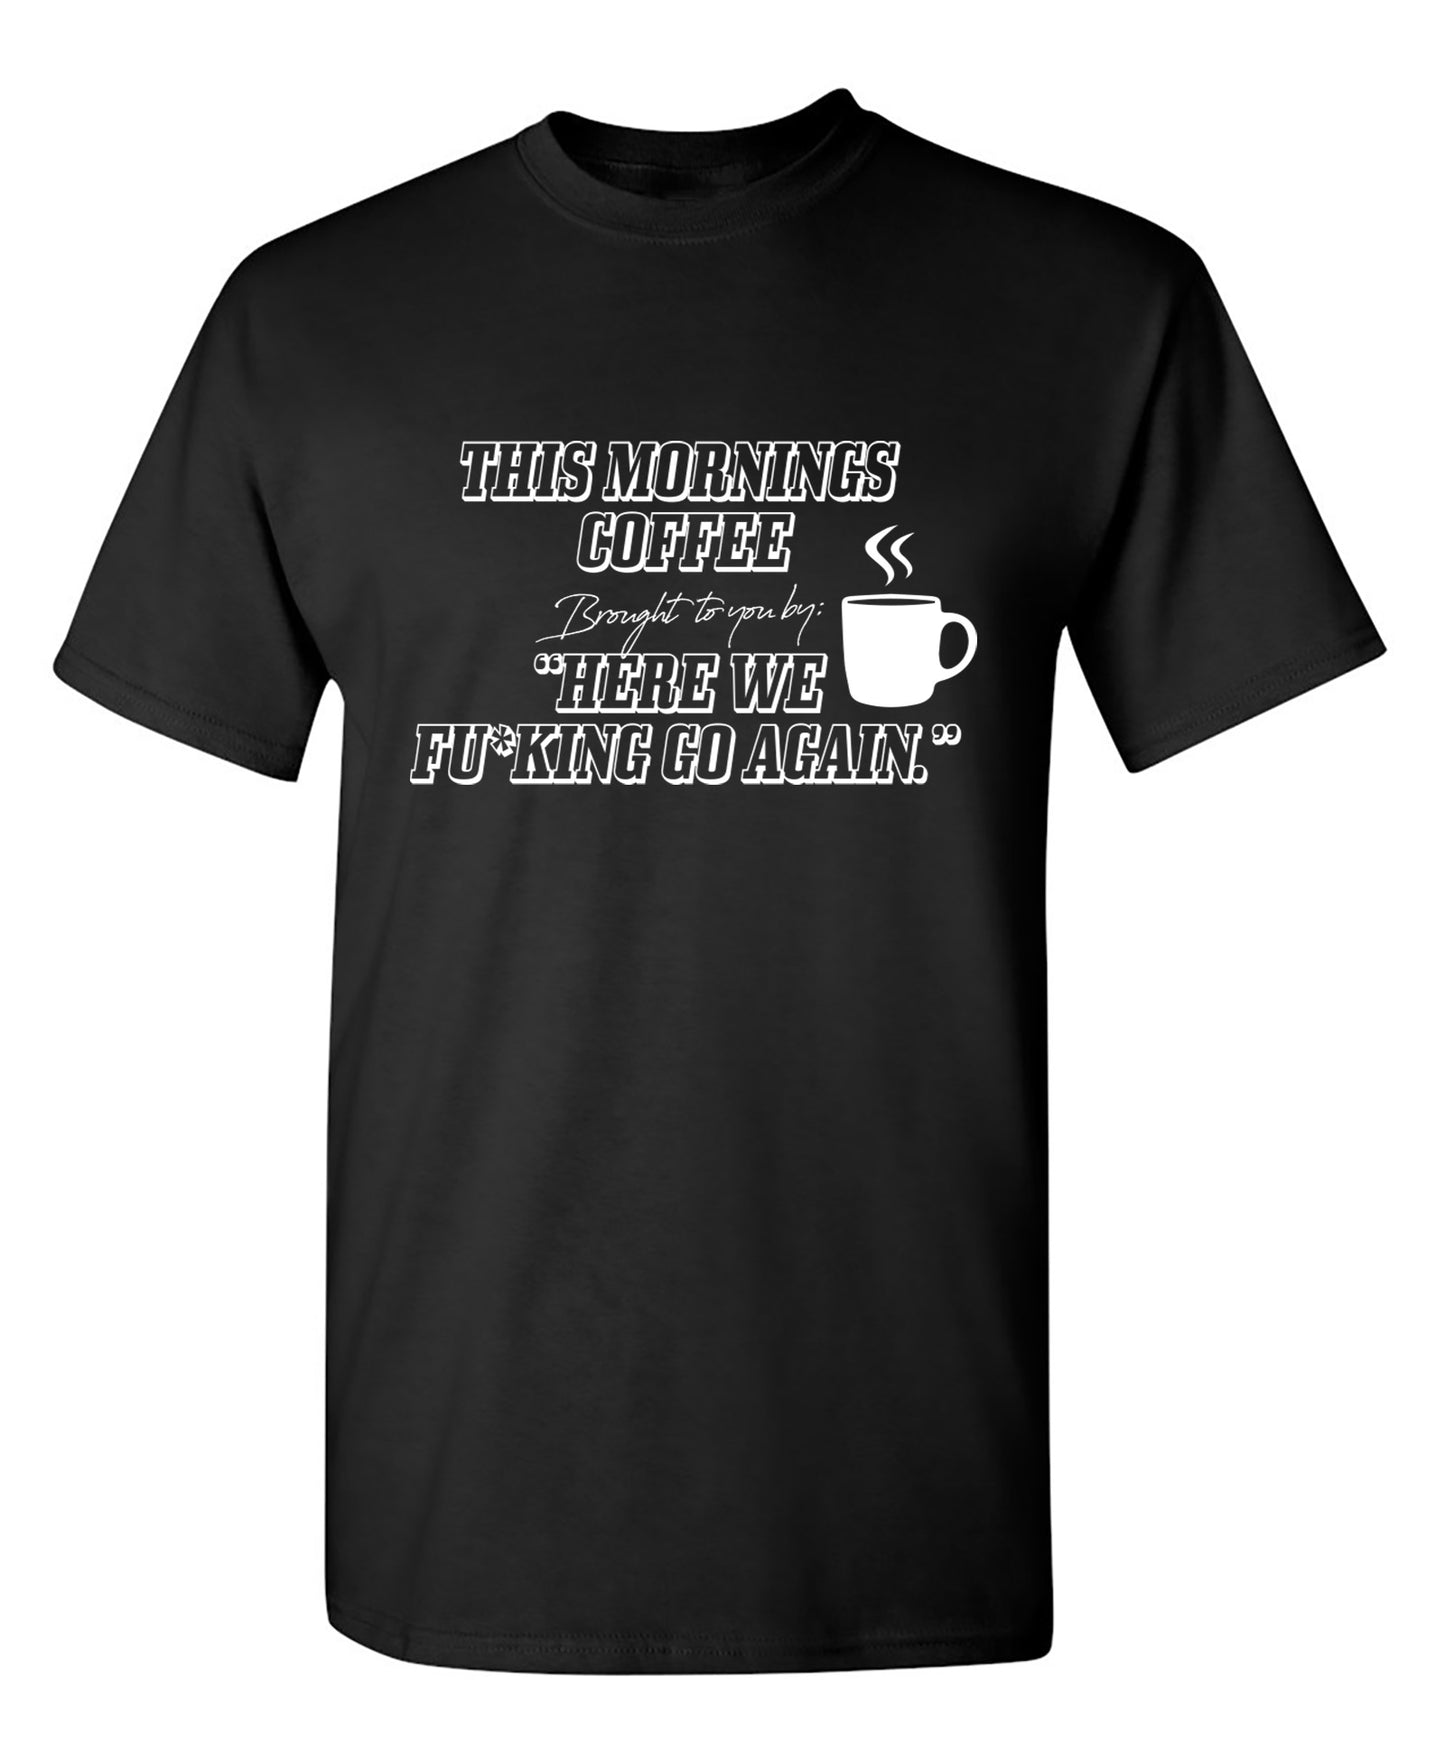 This Morning Coffee - Funny T Shirts & Graphic Tees